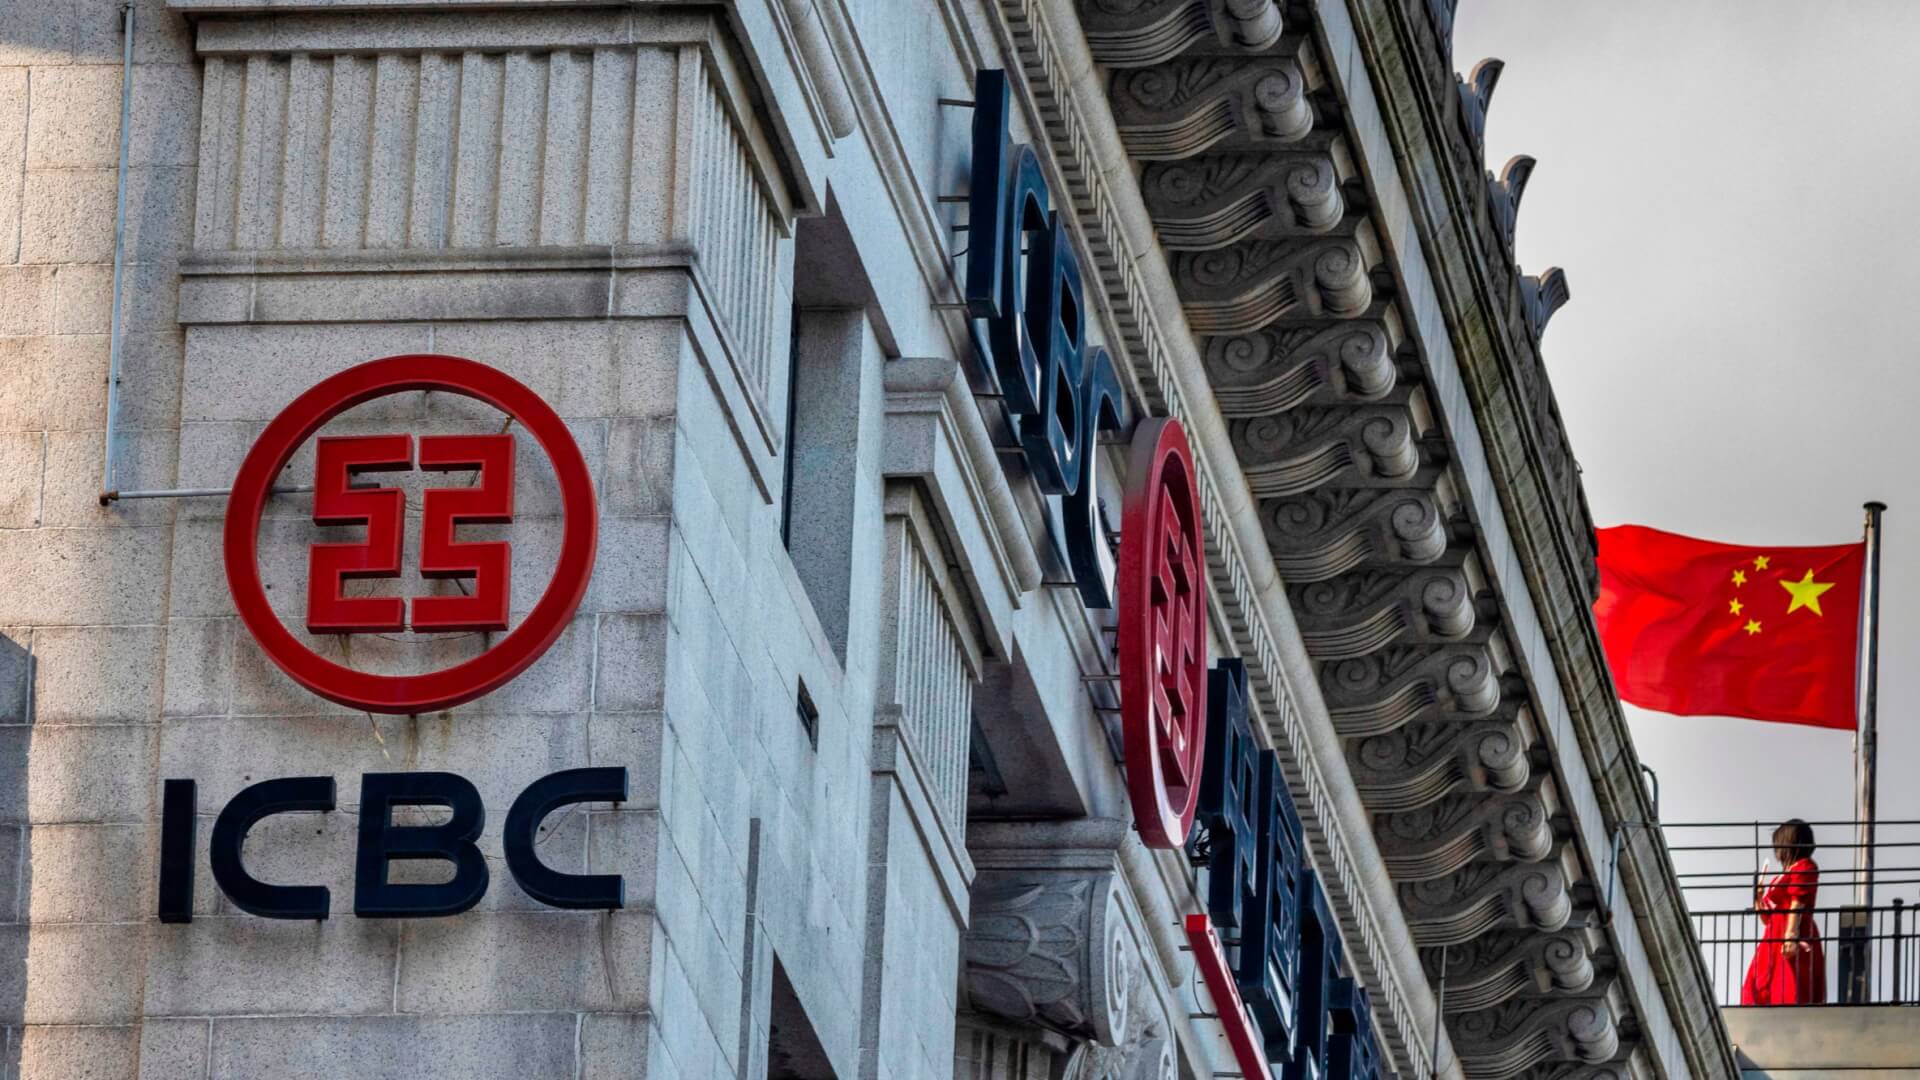 Major Chinese Banks Lending Billions of Dollars to Russia Amid Western Sanctions: Financial Times